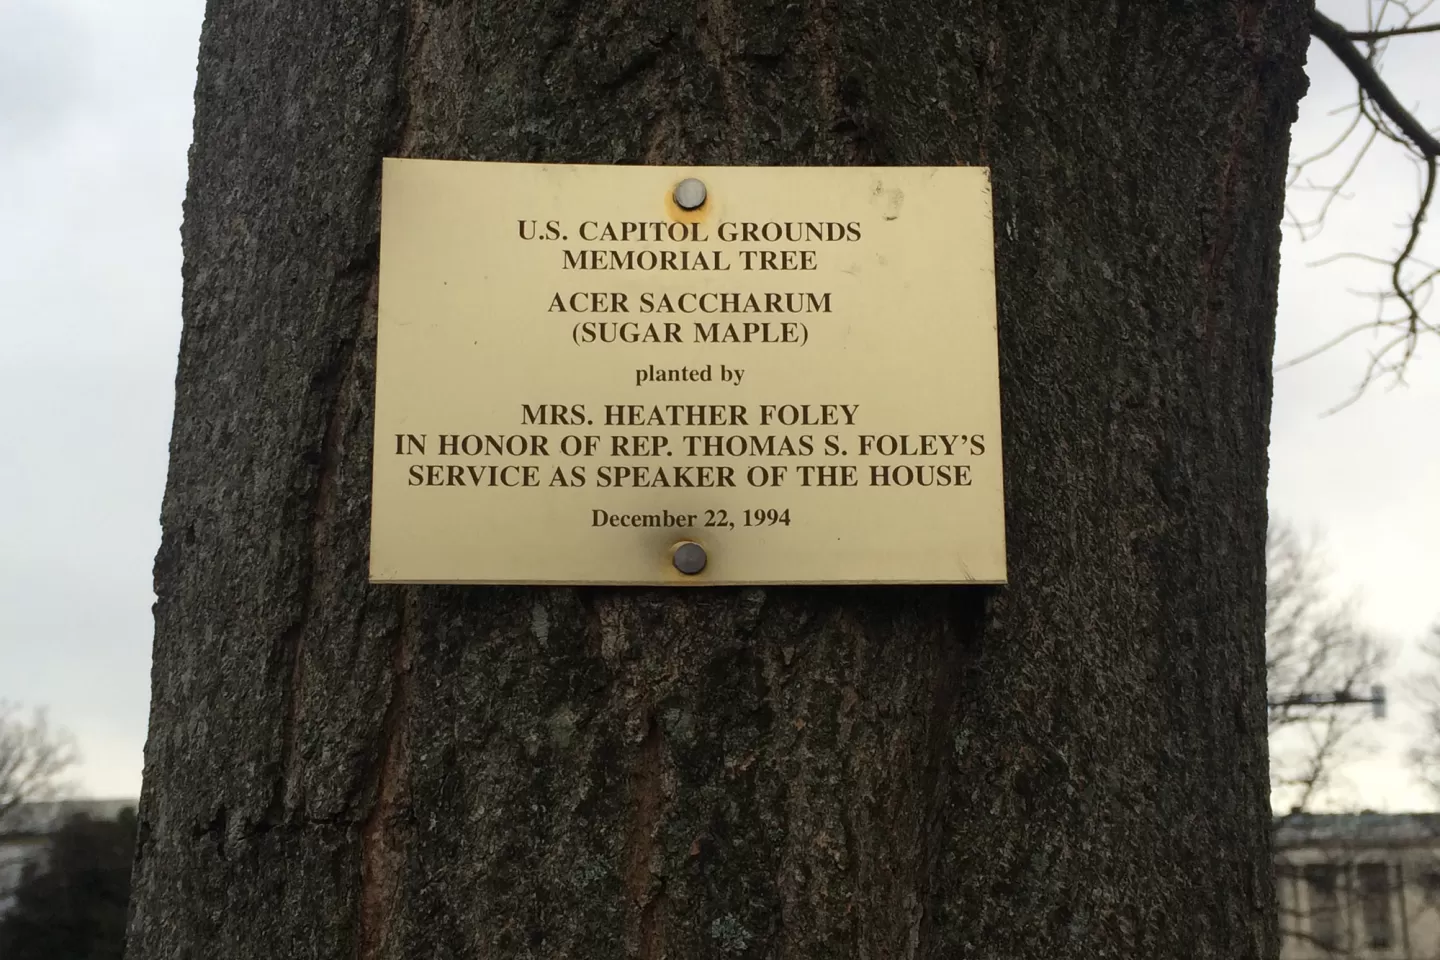 Plaque that reads: U.S. Capitol Grounds Memorial Tree  Acer saccharum (Sugar Maple)  planted by  Mrs. Heather Foley In Honor of Rep. Thomas S. Foley’s Service as Speaker of the House  December 22, 1994